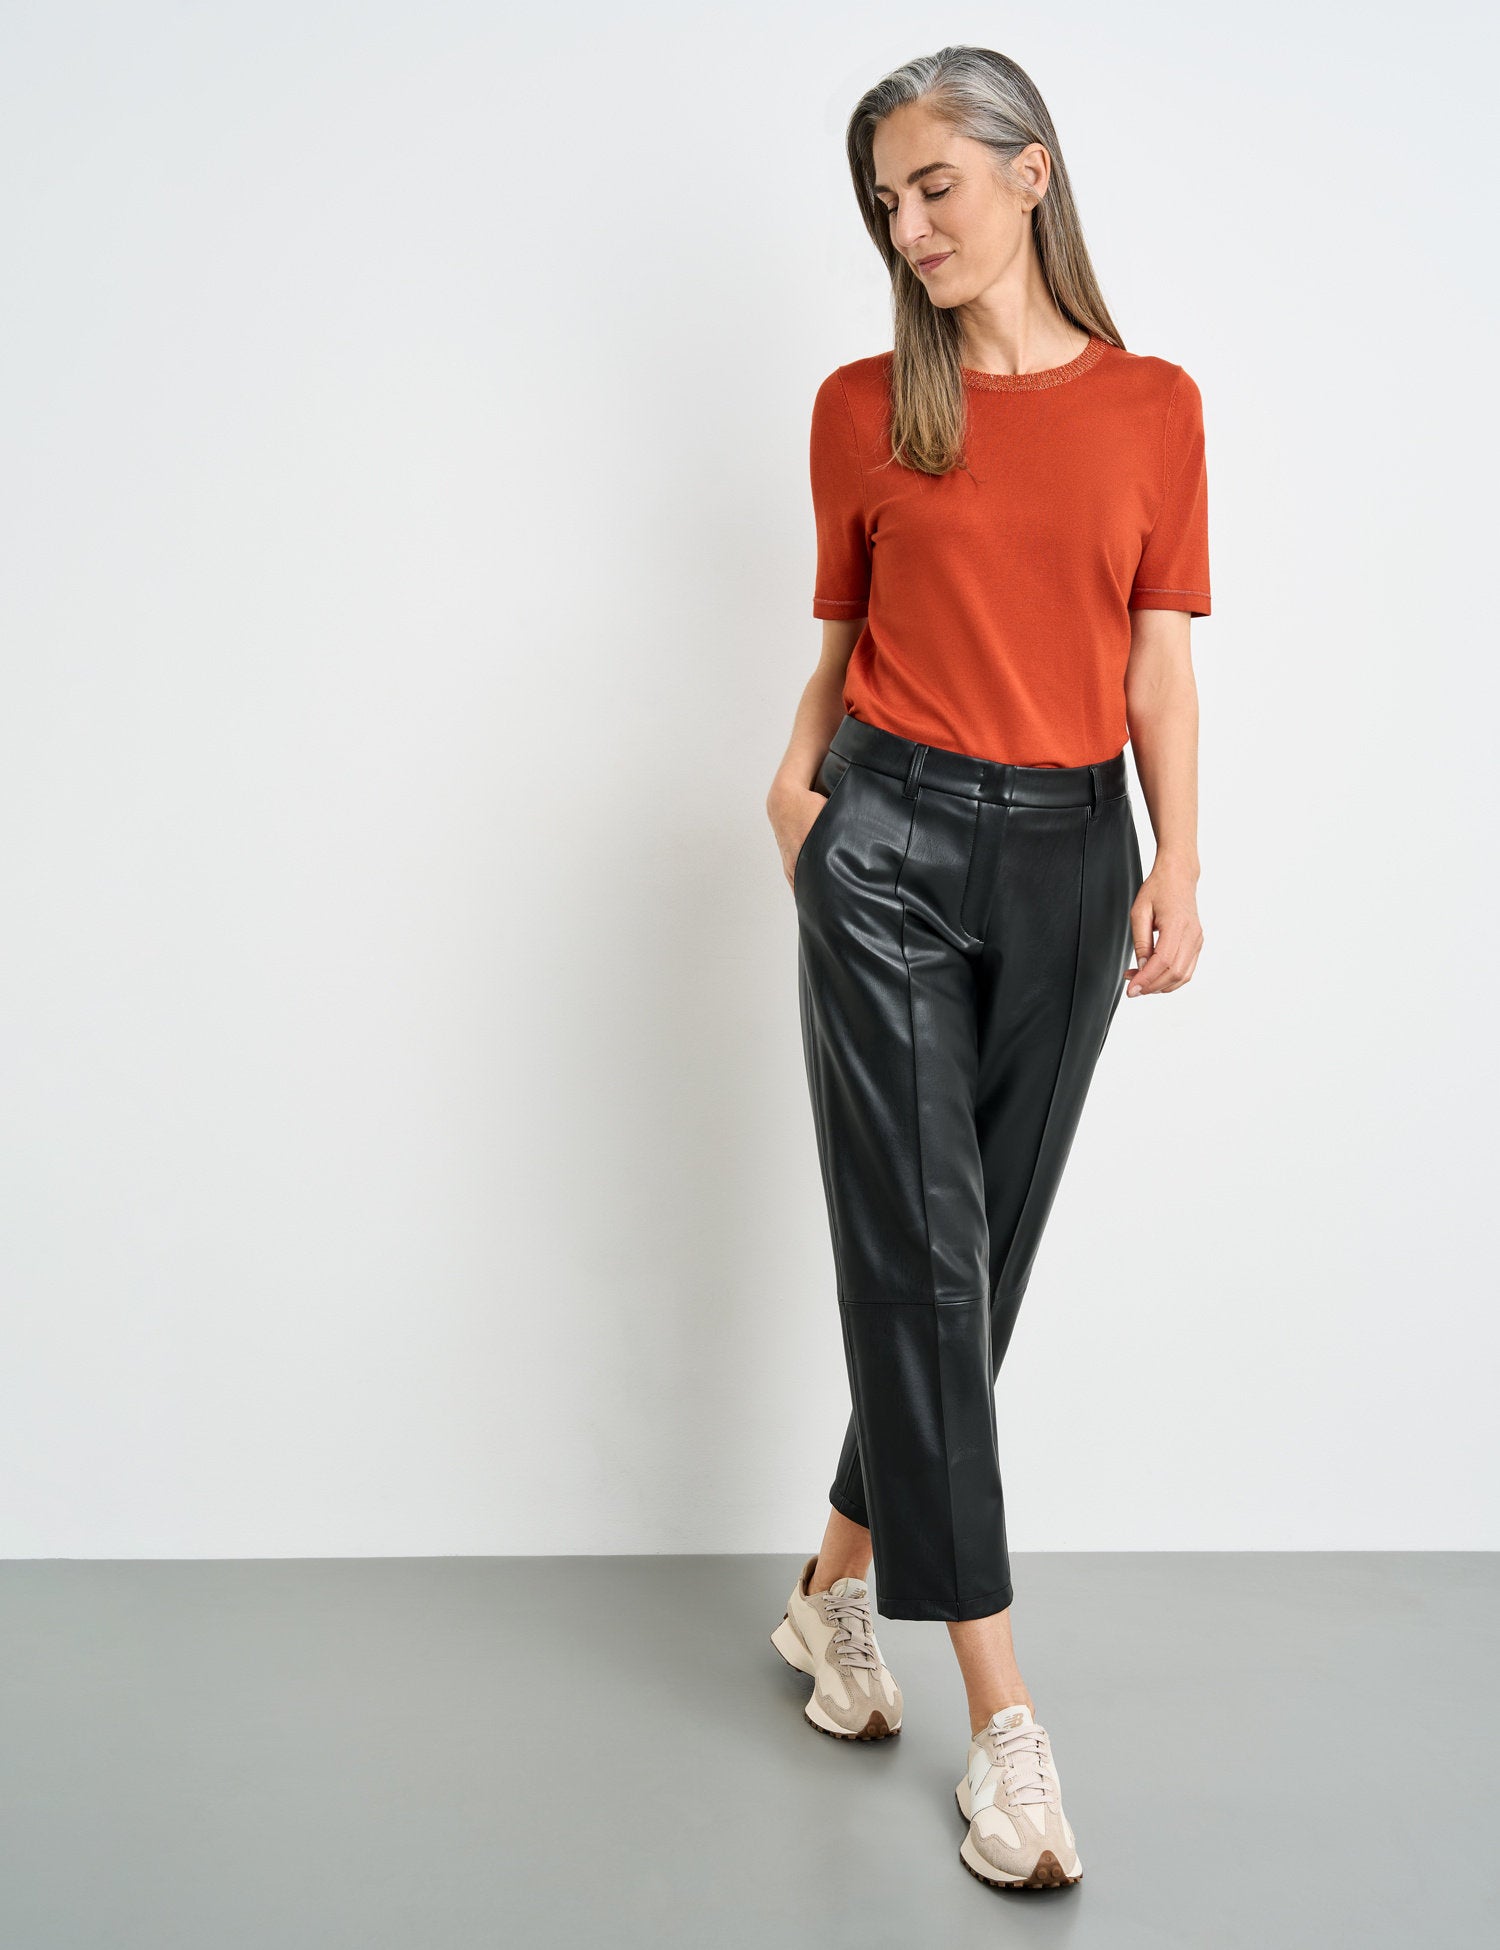 City Style 7/8 Length Faux Leather Trousers_122017-66778_11000_01